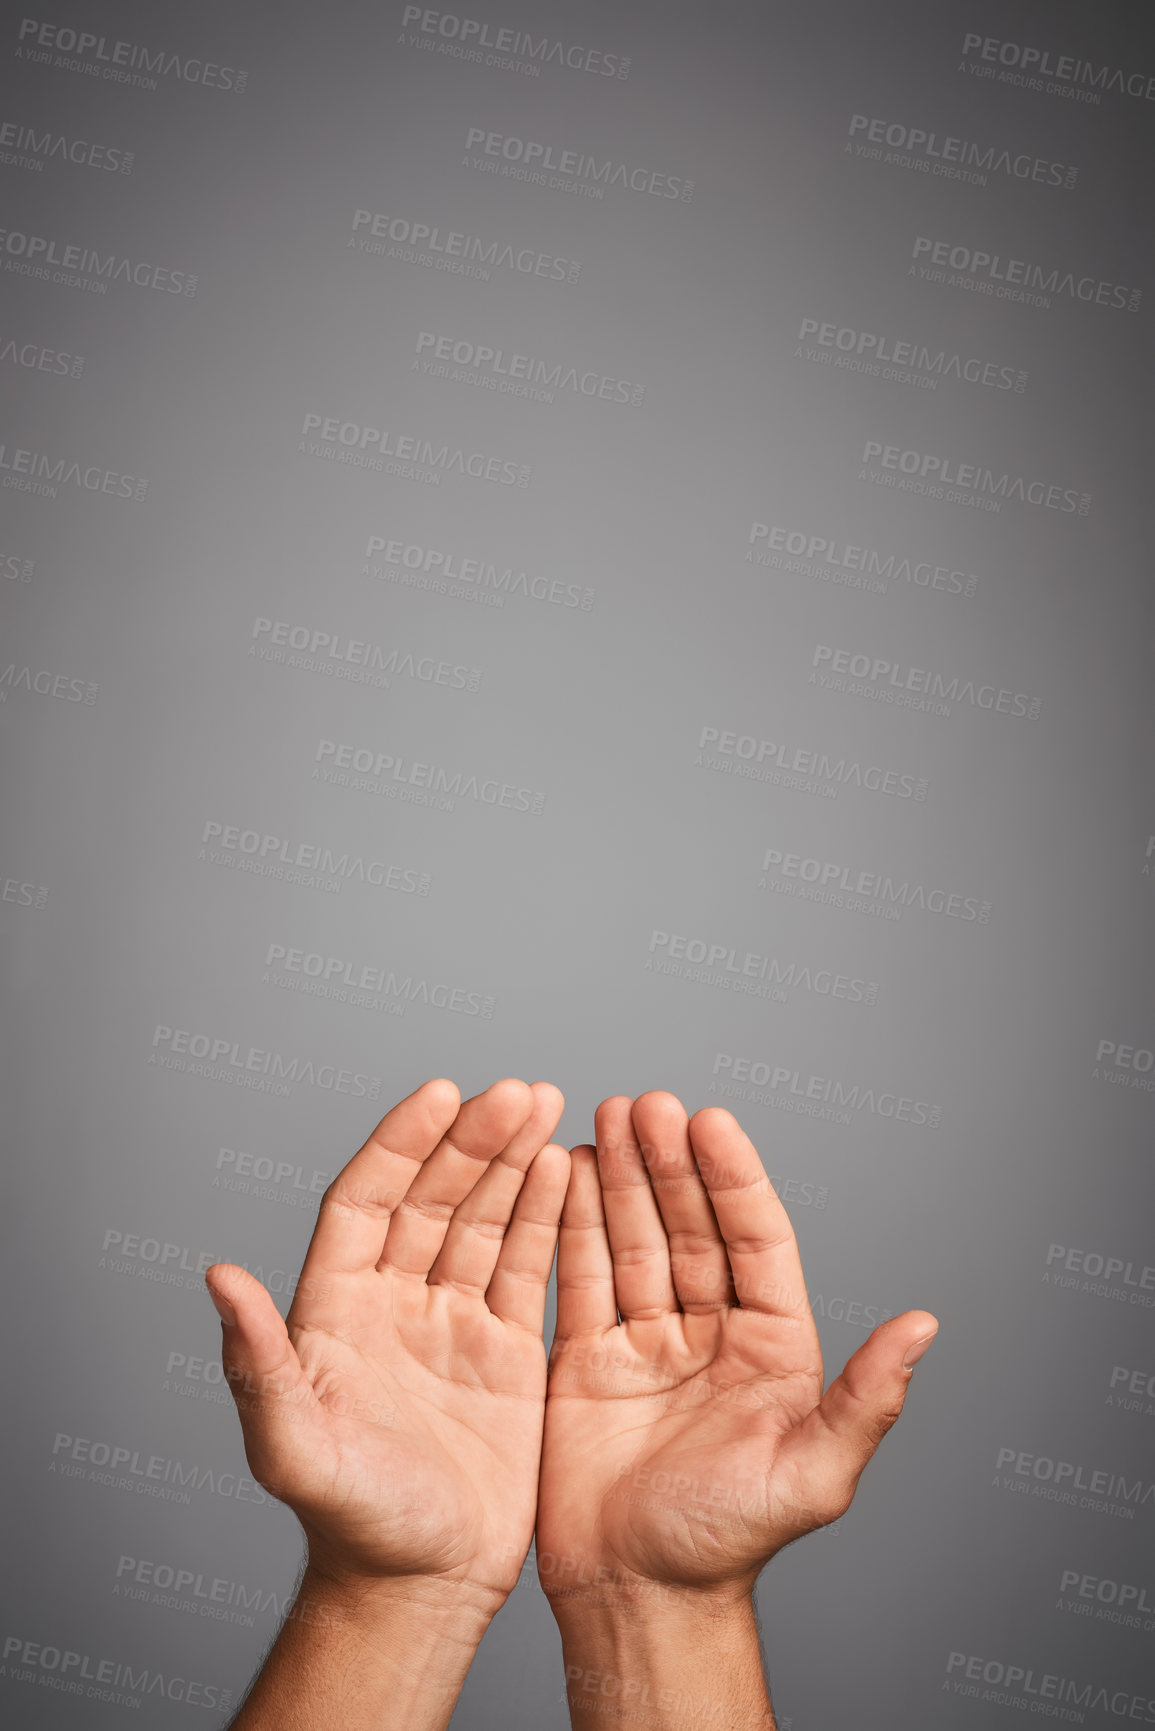 Buy stock photo Studio shot of unidentifiable hands cupped against a gray background